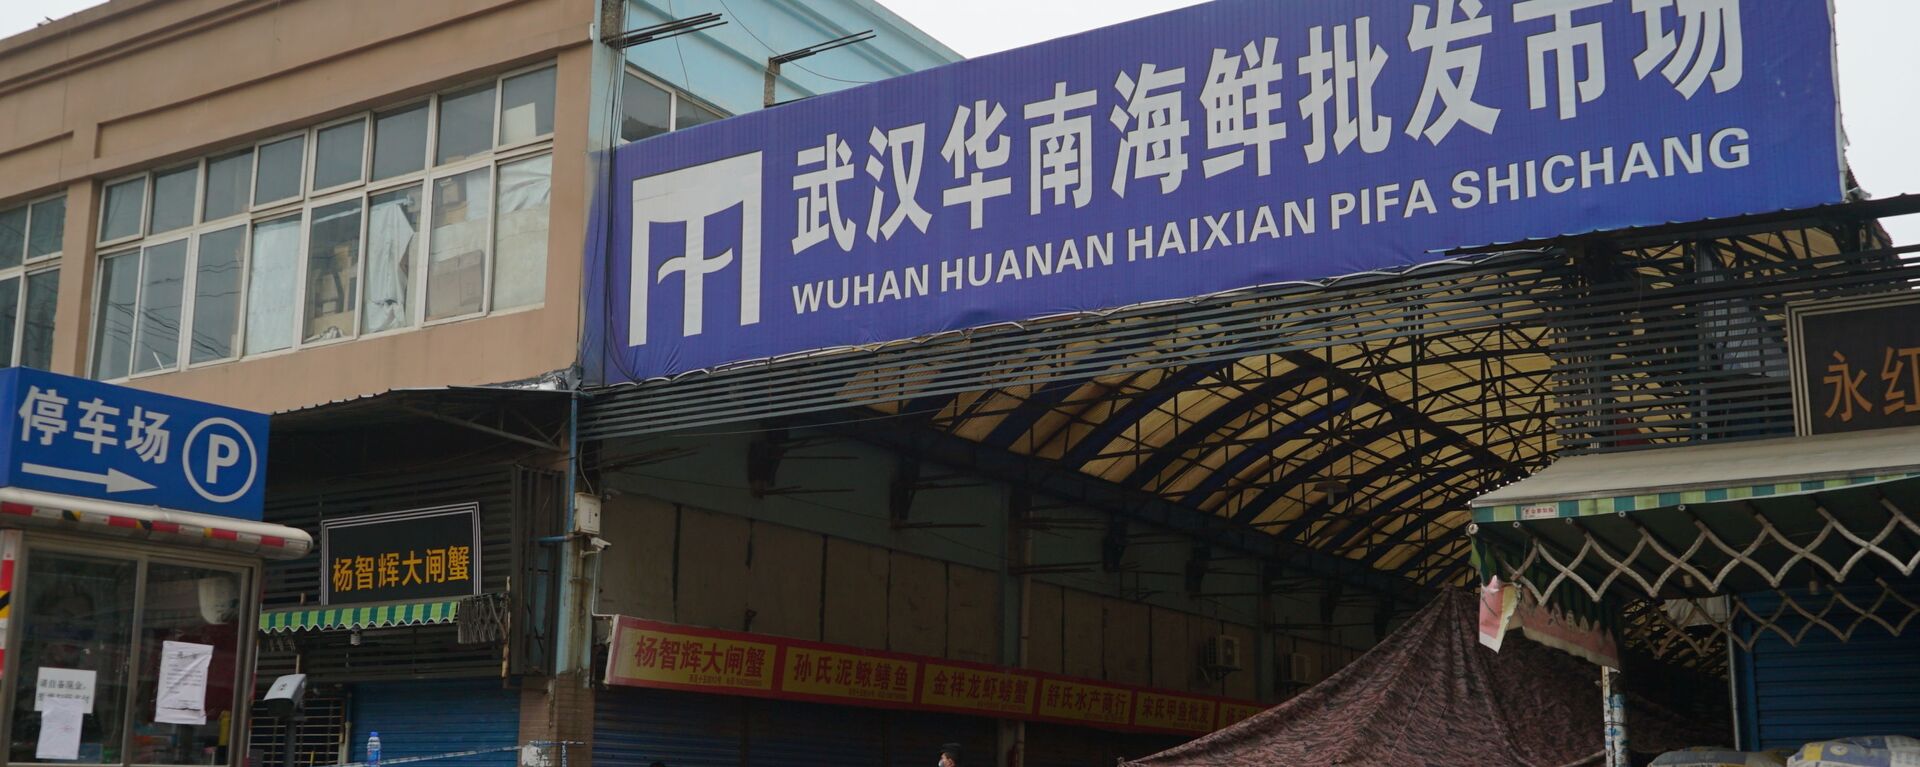 The Wuhan Huanan Wholesale Seafood Market, where a number of people related to the market fell ill with a virus, sits closed in Wuhan, China, Tuesday, Jan. 21, 2020. - Sputnik International, 1920, 15.02.2021